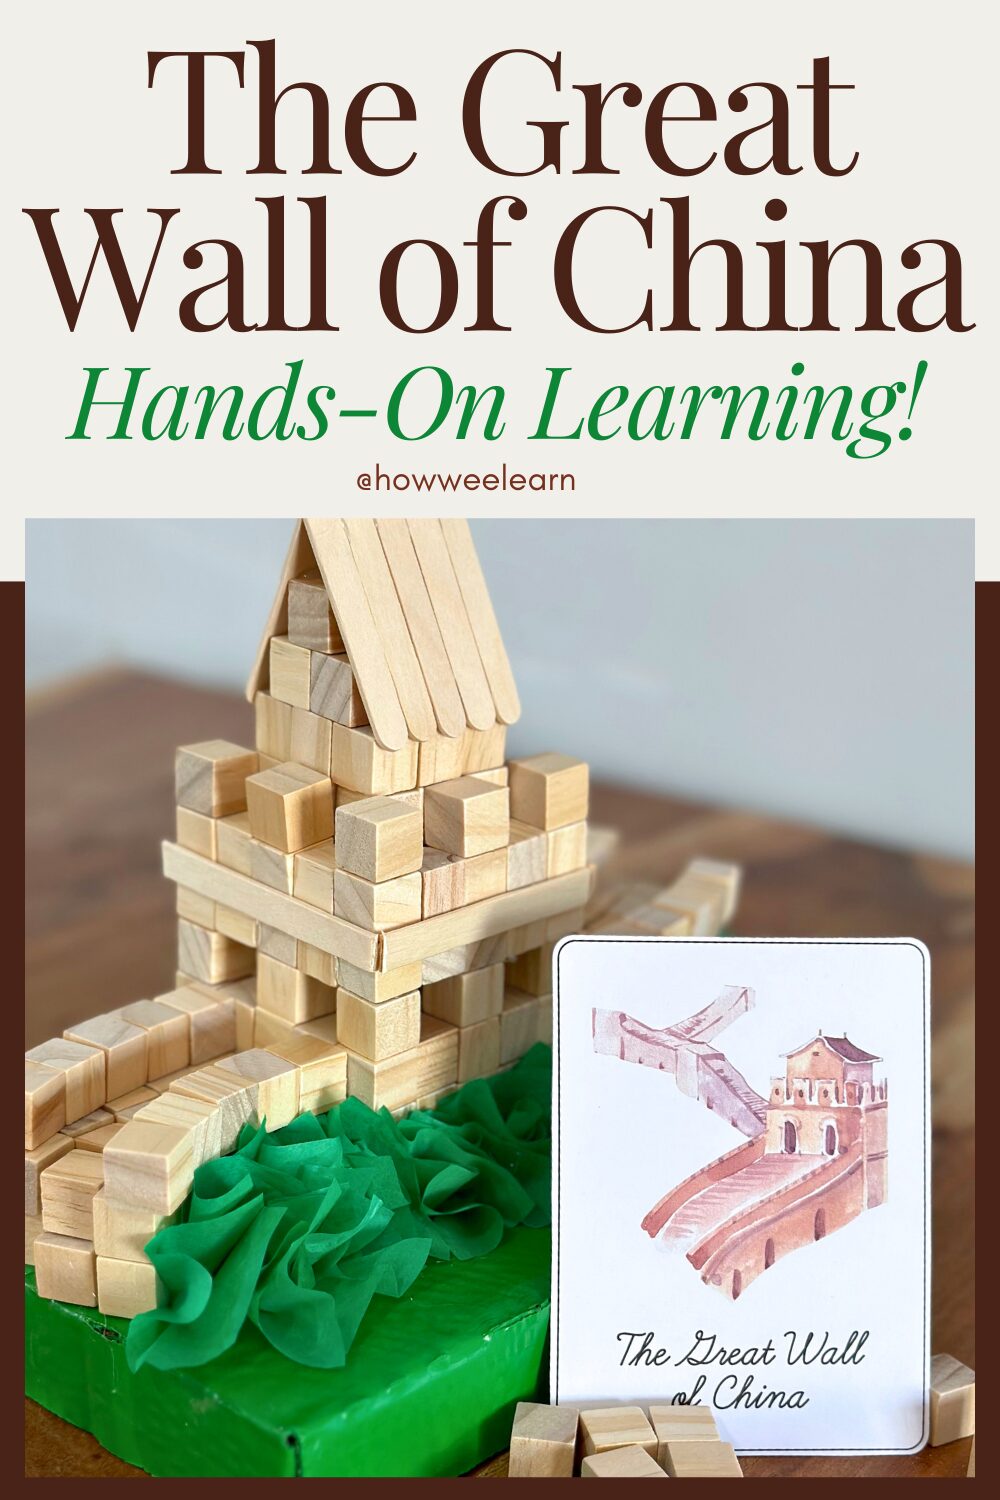 The Great Wall of China Hands-On Learning!